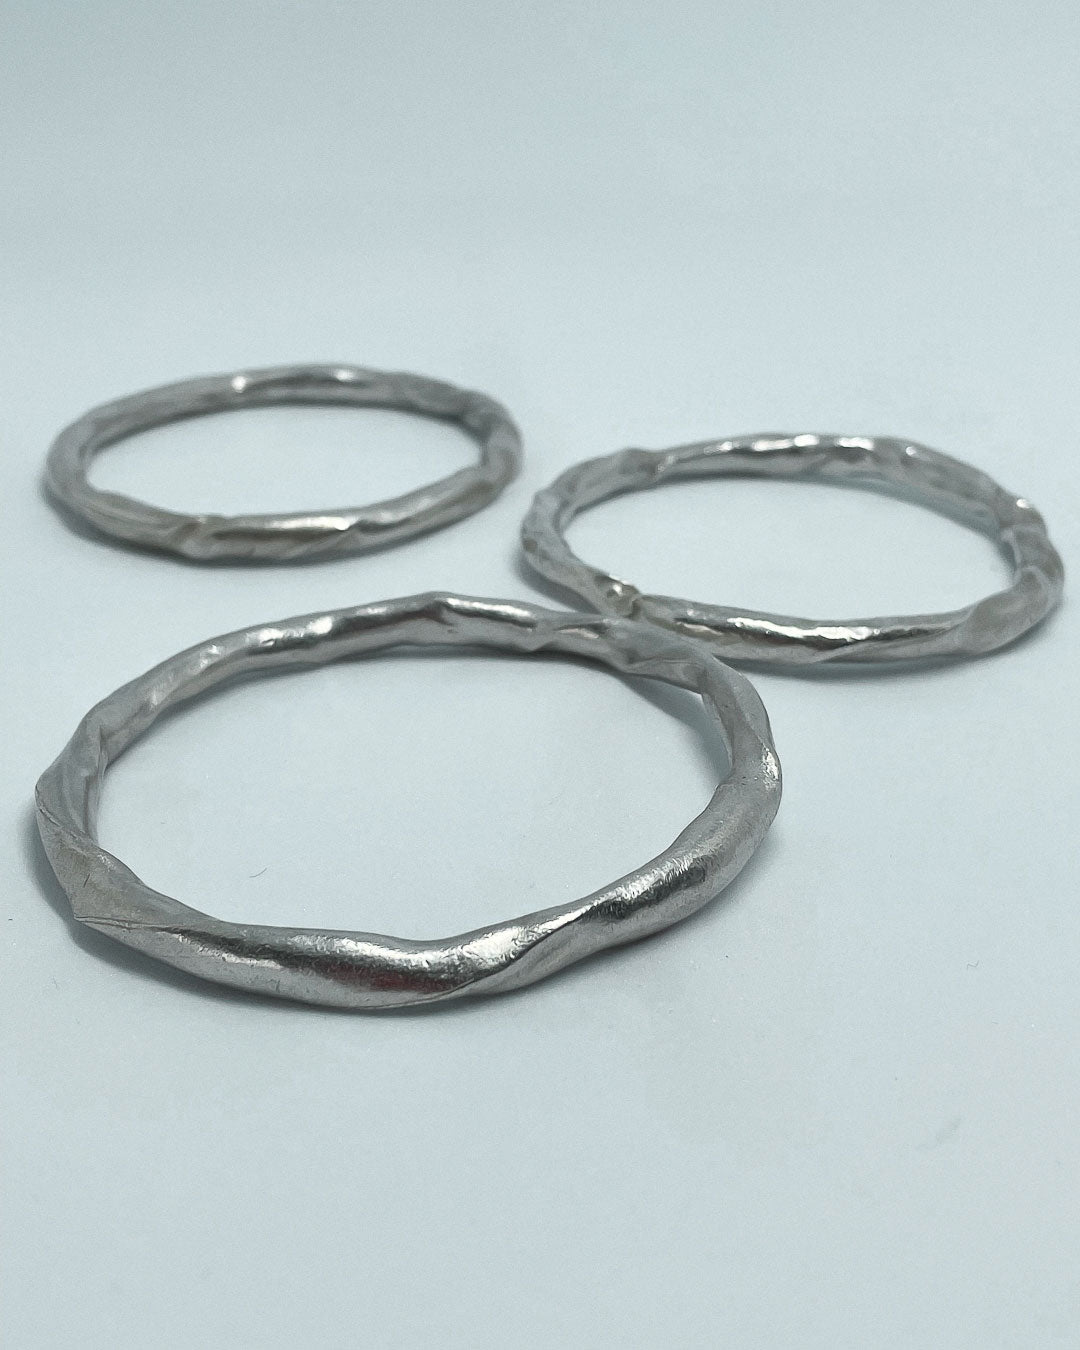 3 heavy organic round Fine Silver Bangles lying on a flat surface